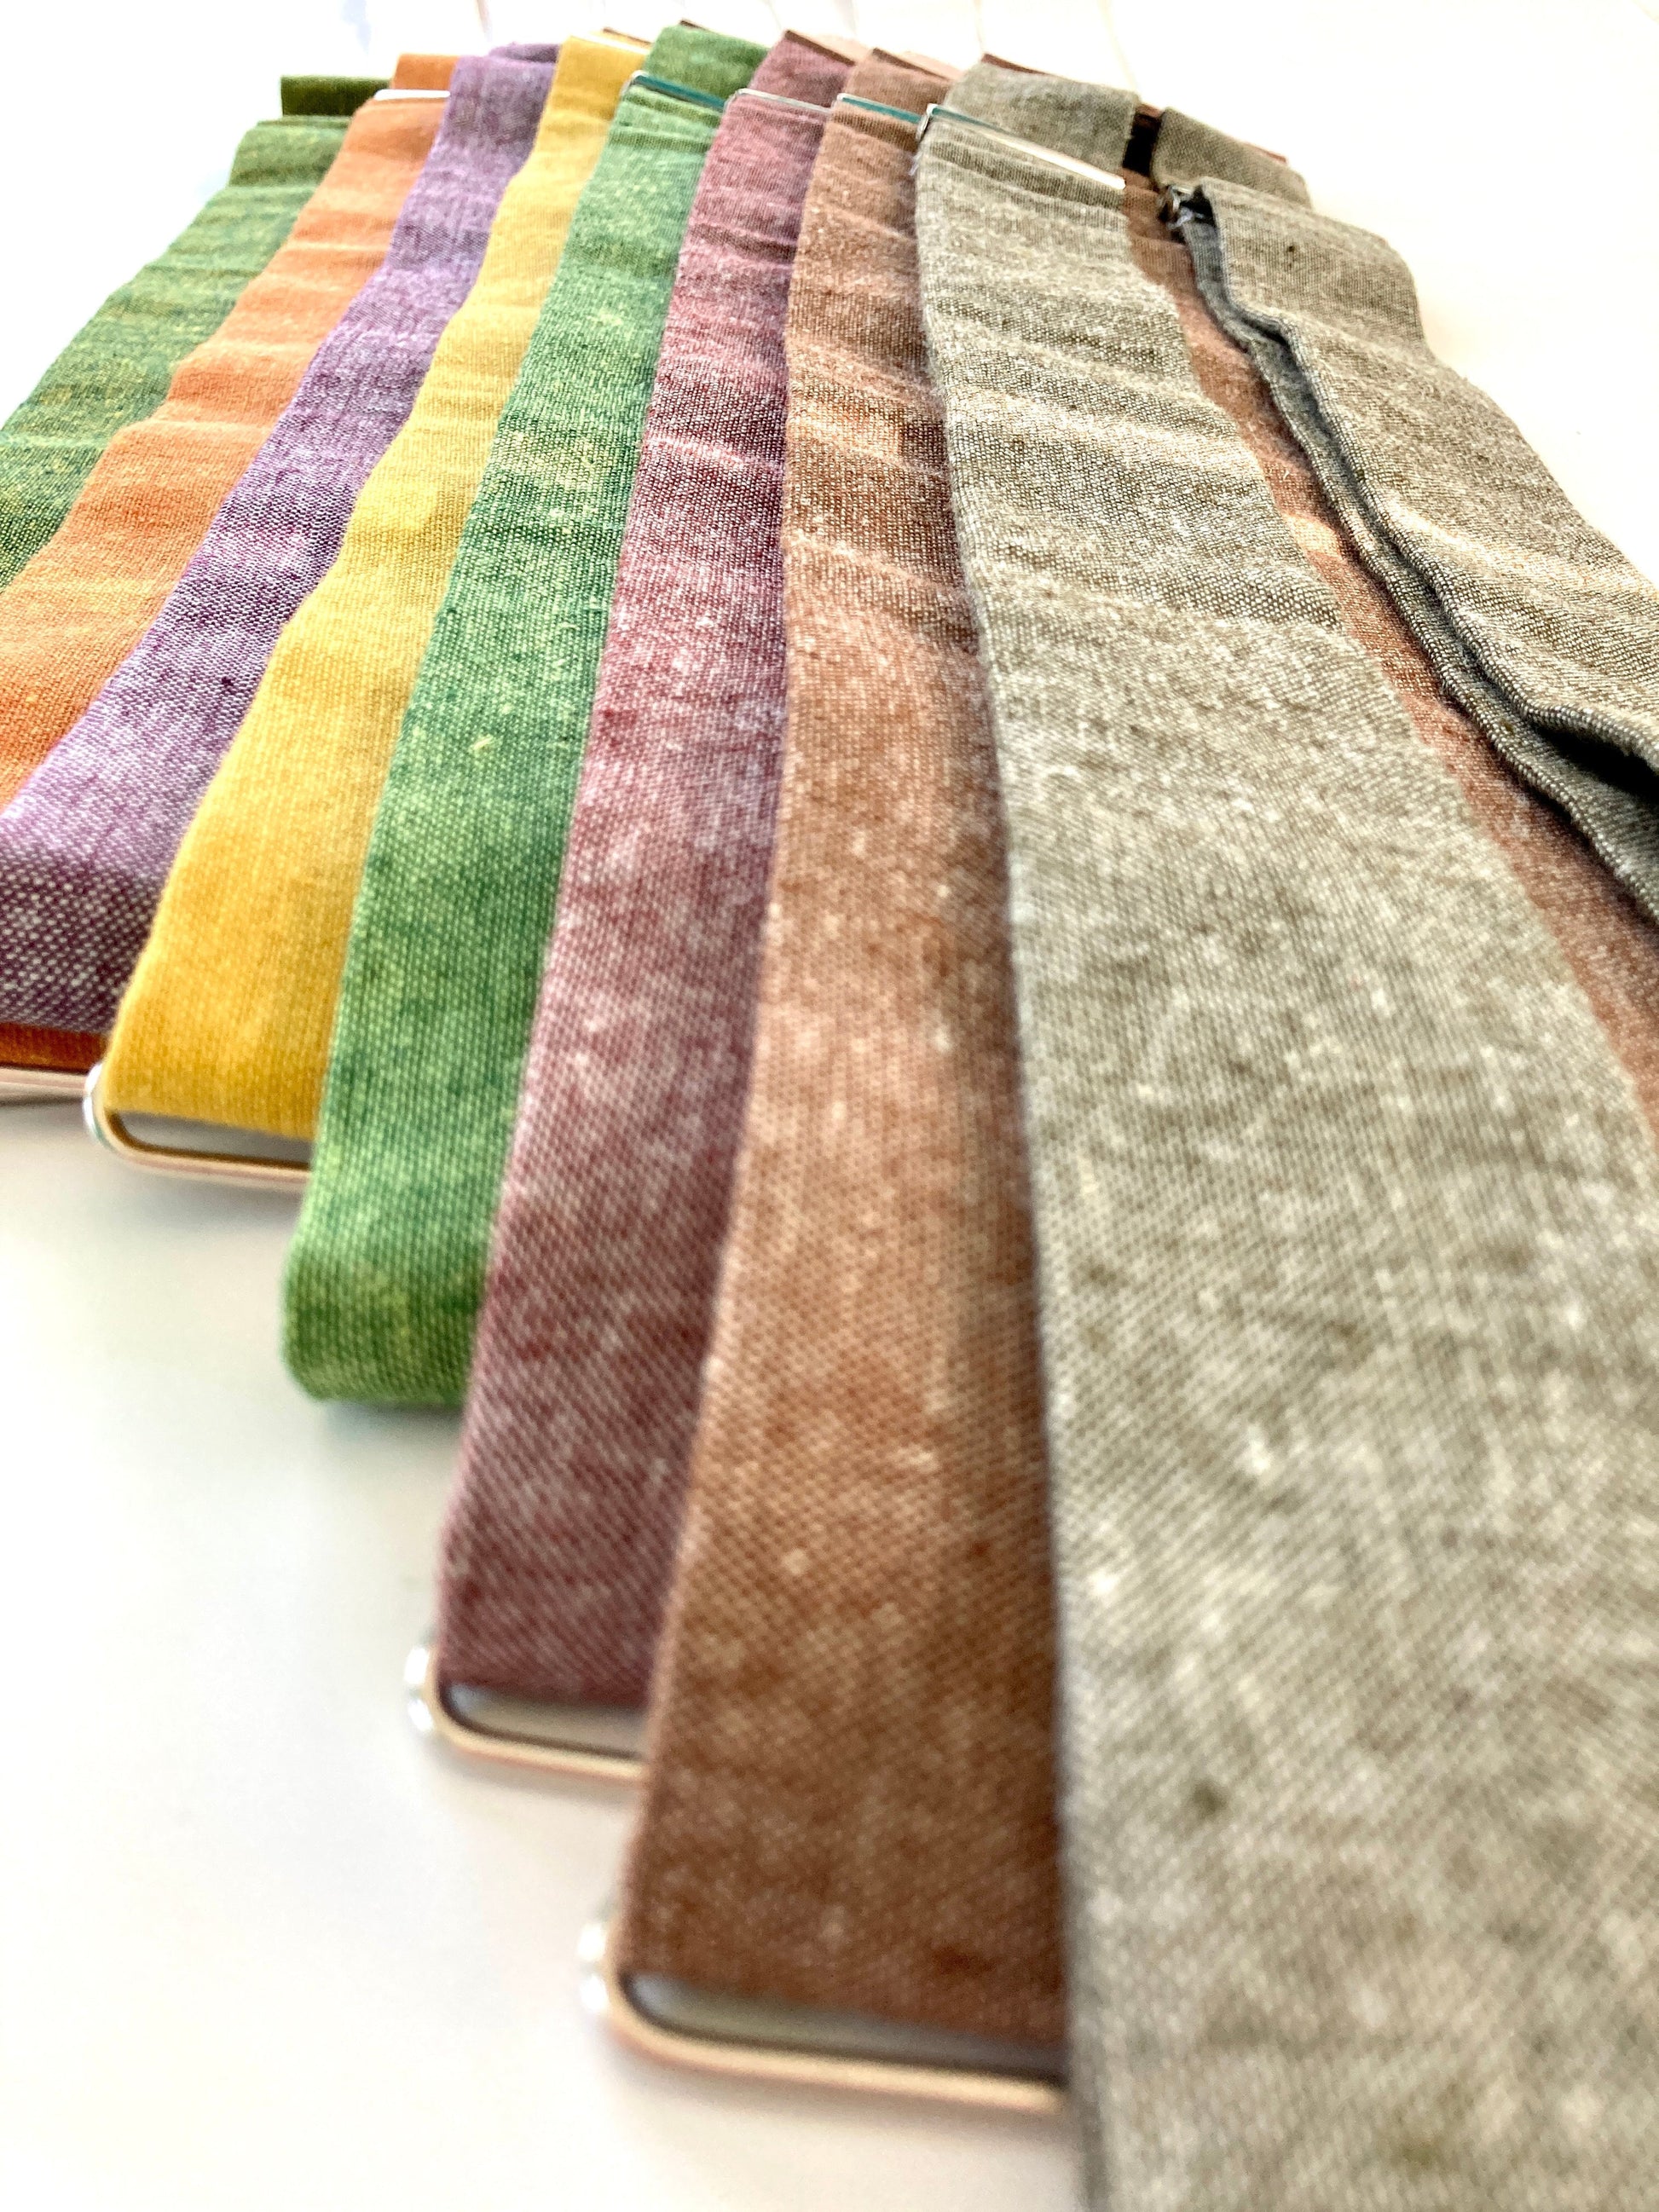 Stratton Suspender Co. Fall Linen Collection straps laid out in the following order: Palm (green and yellow woven linen), Orange, Purple, Yellow, Spruce (Bright Green), Rust or Maroon, Nutmeg (Brown), Olive Green